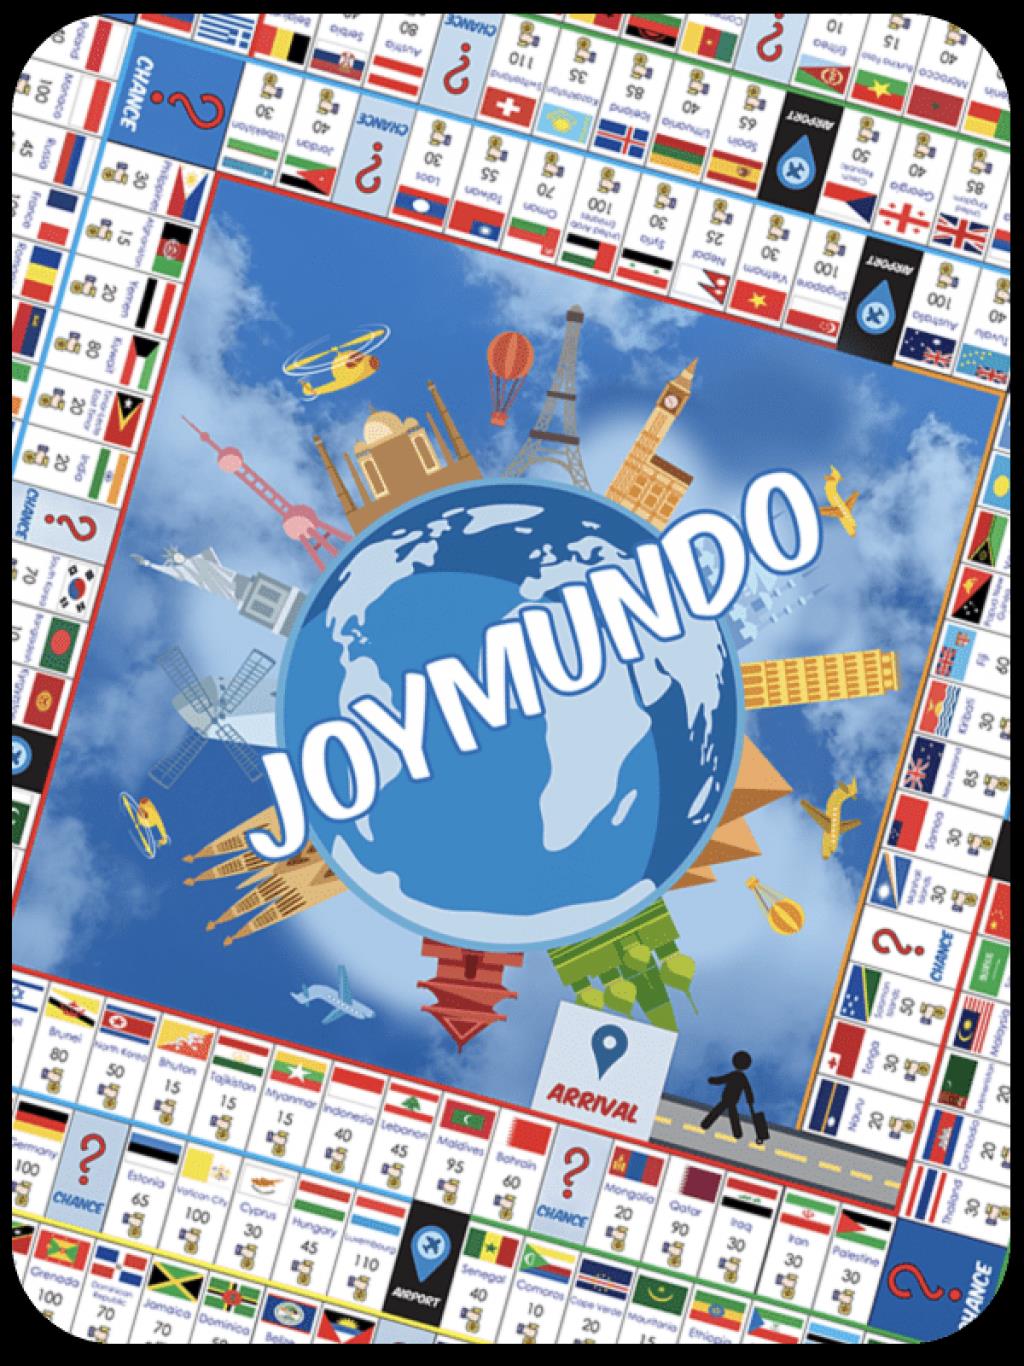 Introducing Joymundo: A Highly Fun And Educational Geography Board Game To Play With Friends And Family